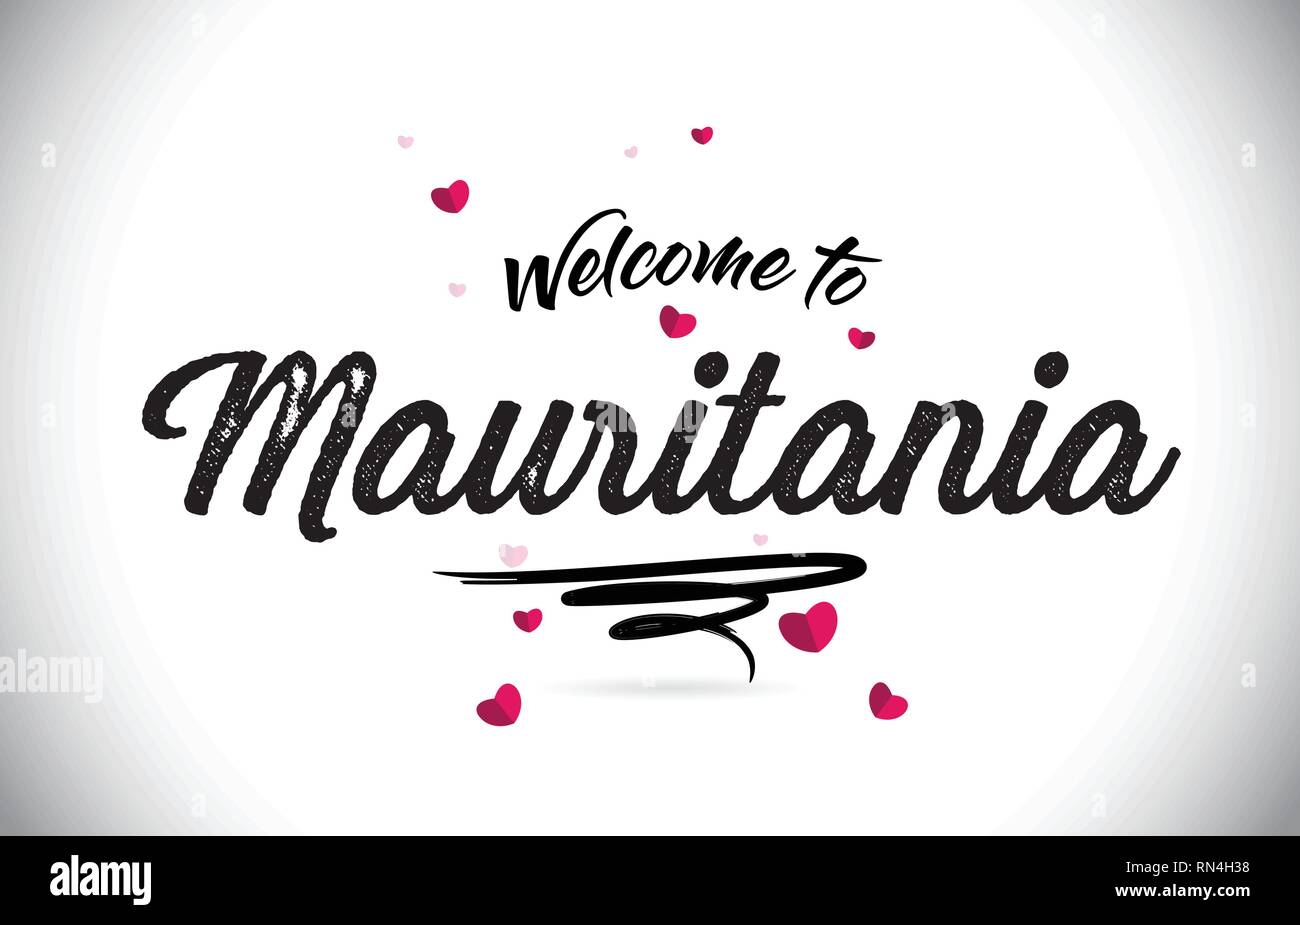 Mauritania Welcome To Word Text with Handwritten Font and Pink Heart Shape Design Vector Illustration. Stock Vector